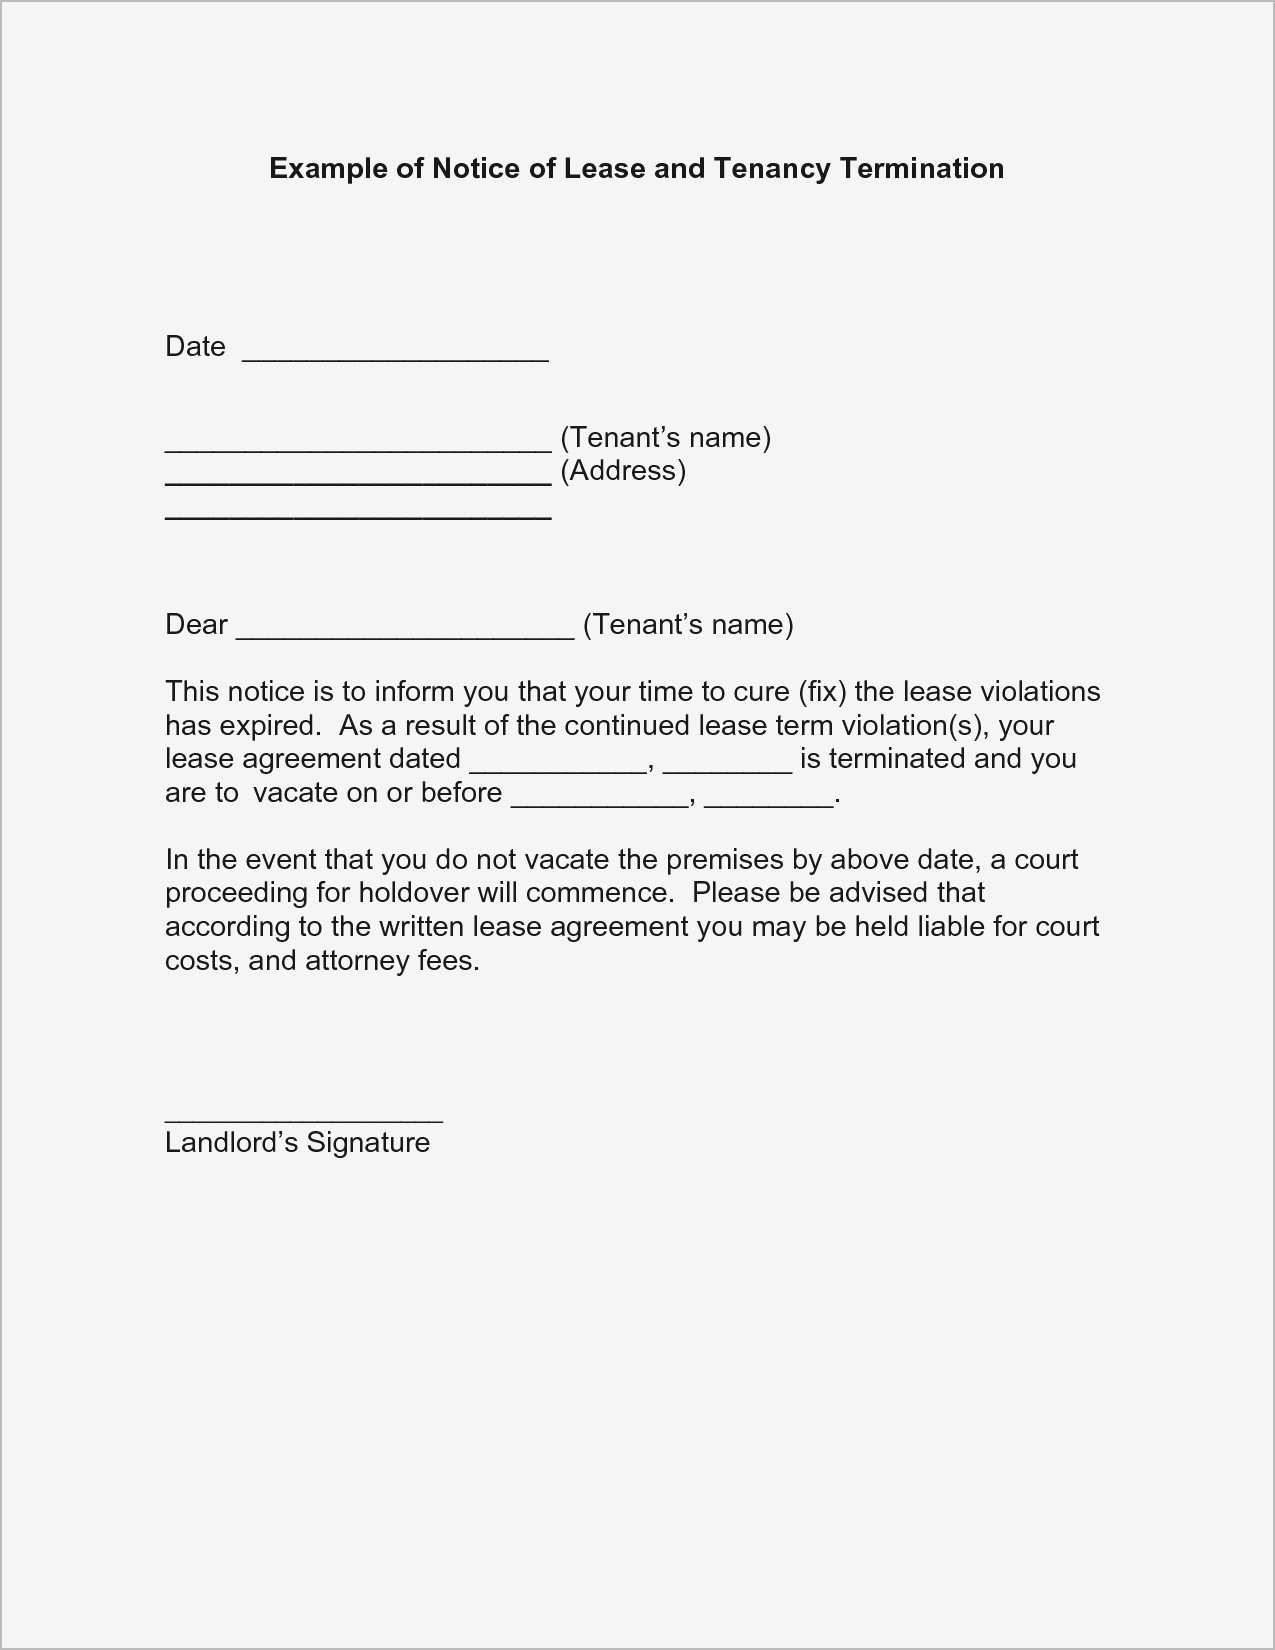 Giving Notice to Tenants Letter Template - Landlord End Tenancy Letter Template